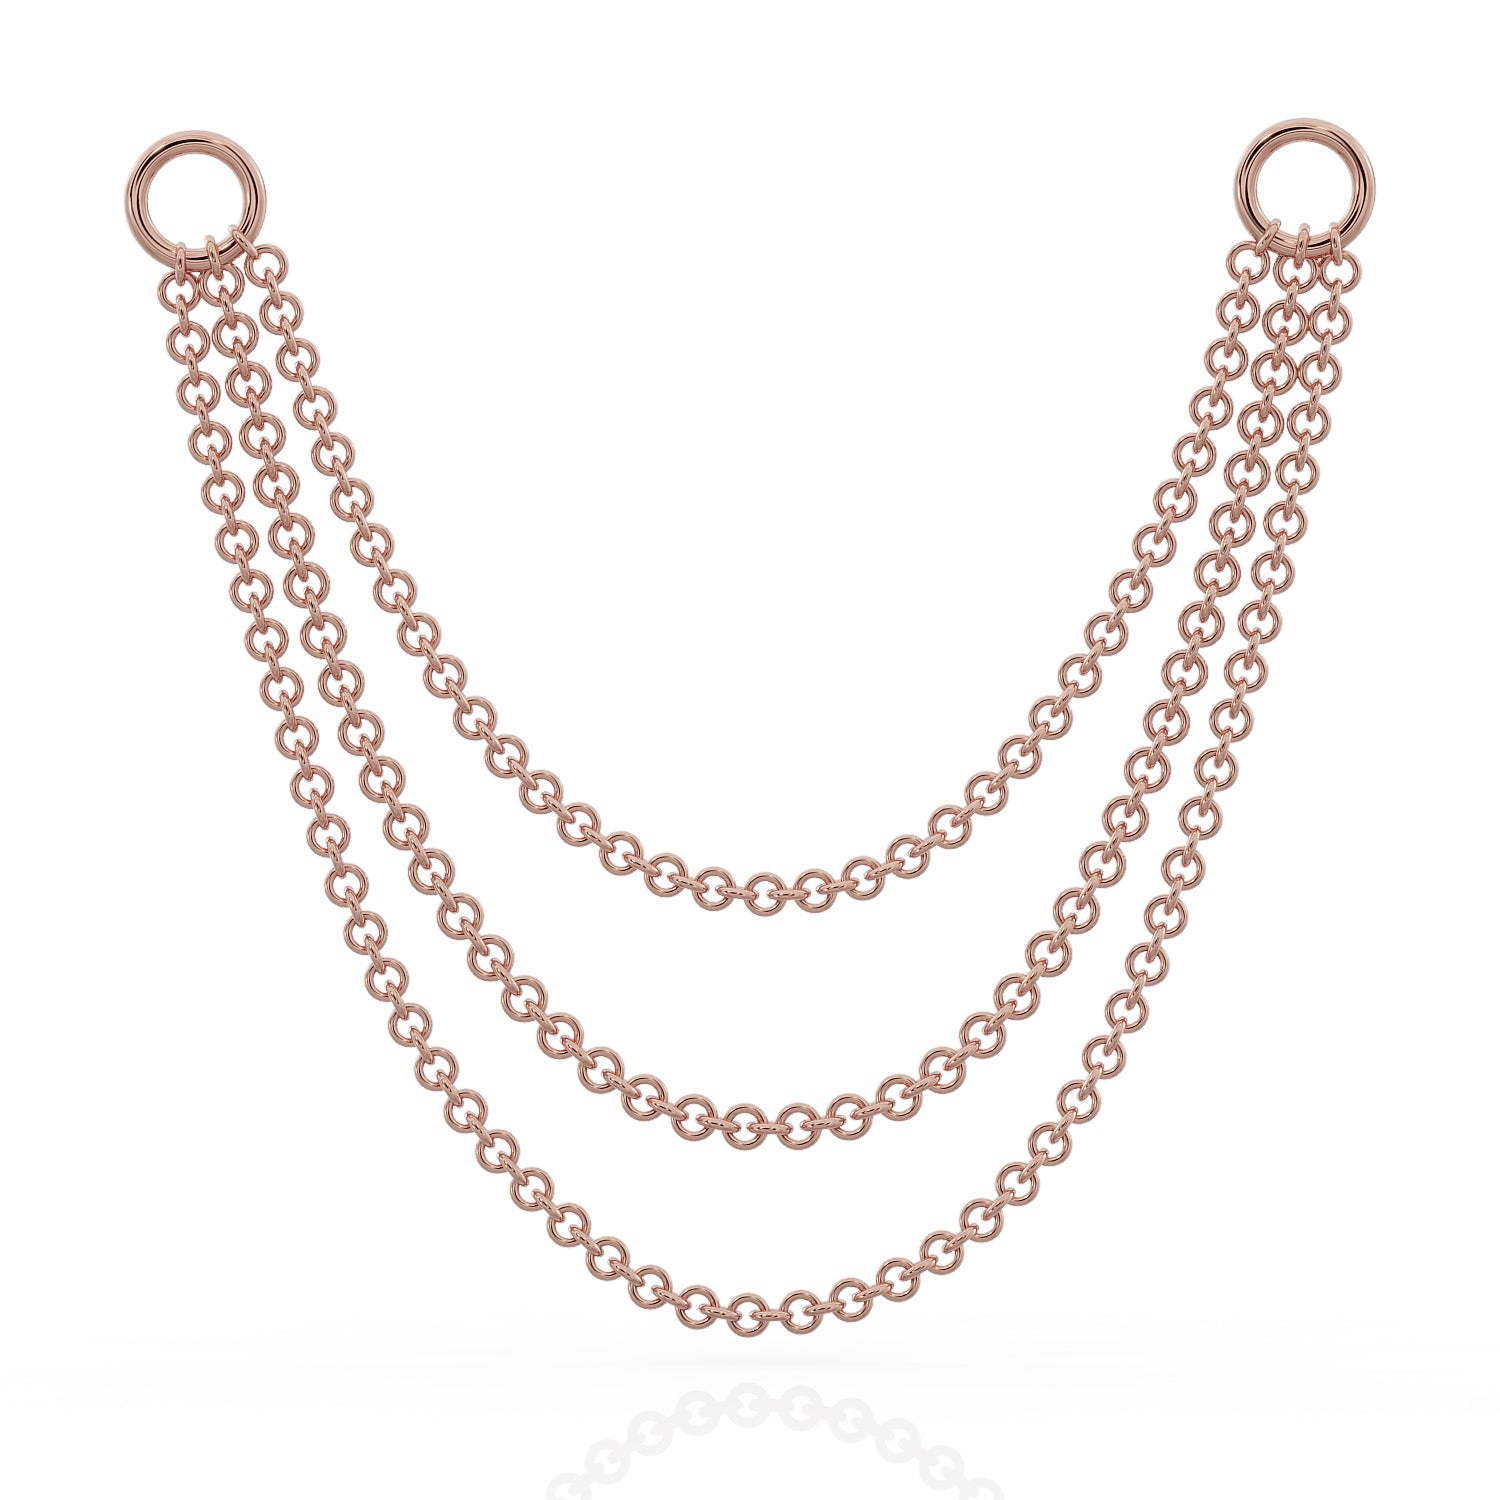 Three Link Chains Piercing Jewelry Add-on Accessory-Rose Gold   36mm